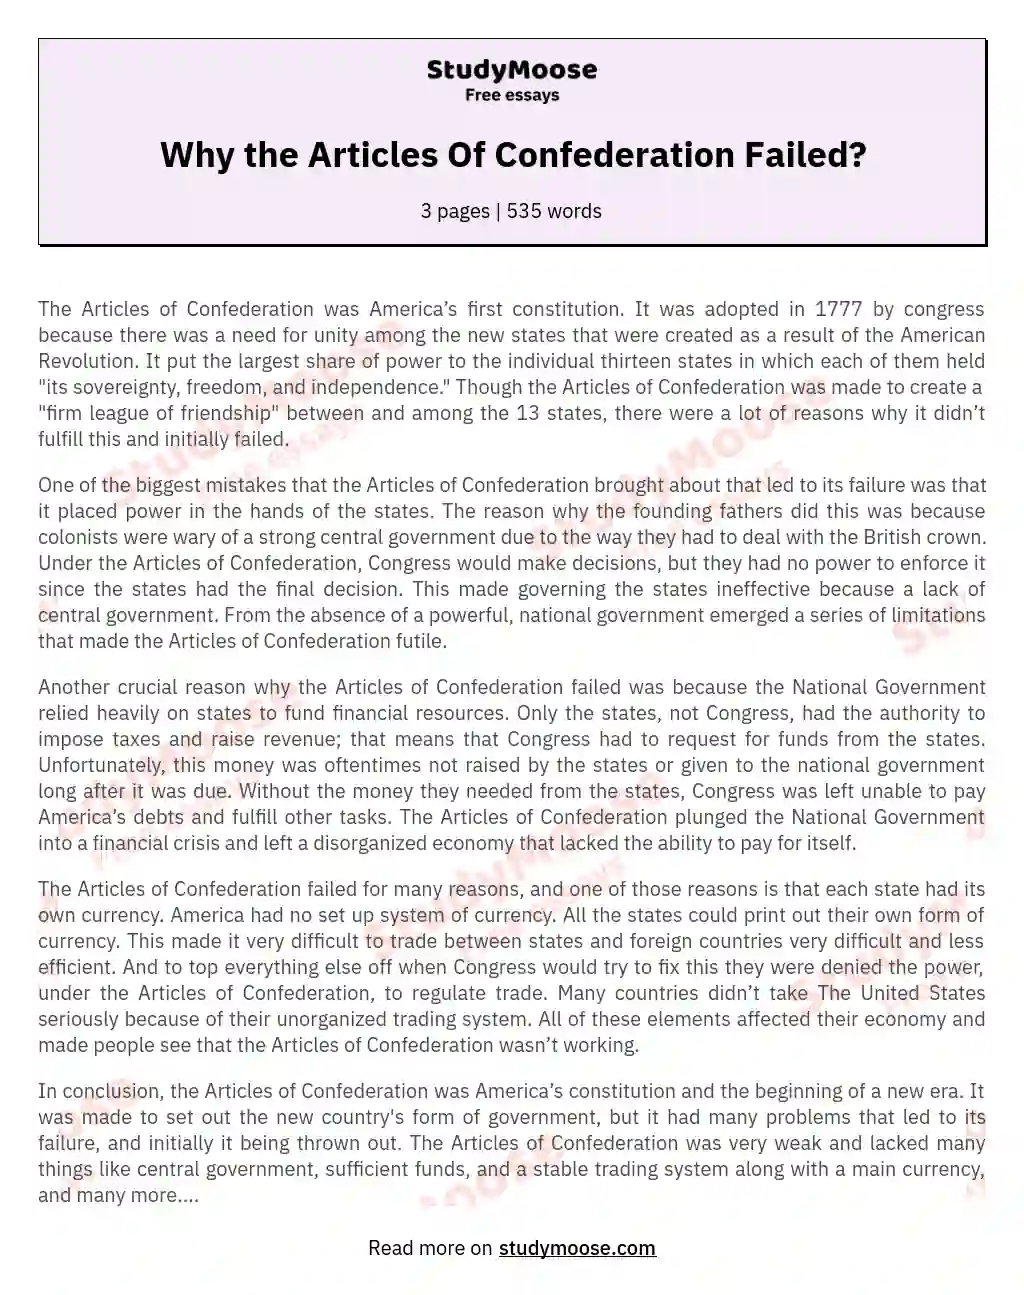 Why the Articles Of Confederation Failed? essay